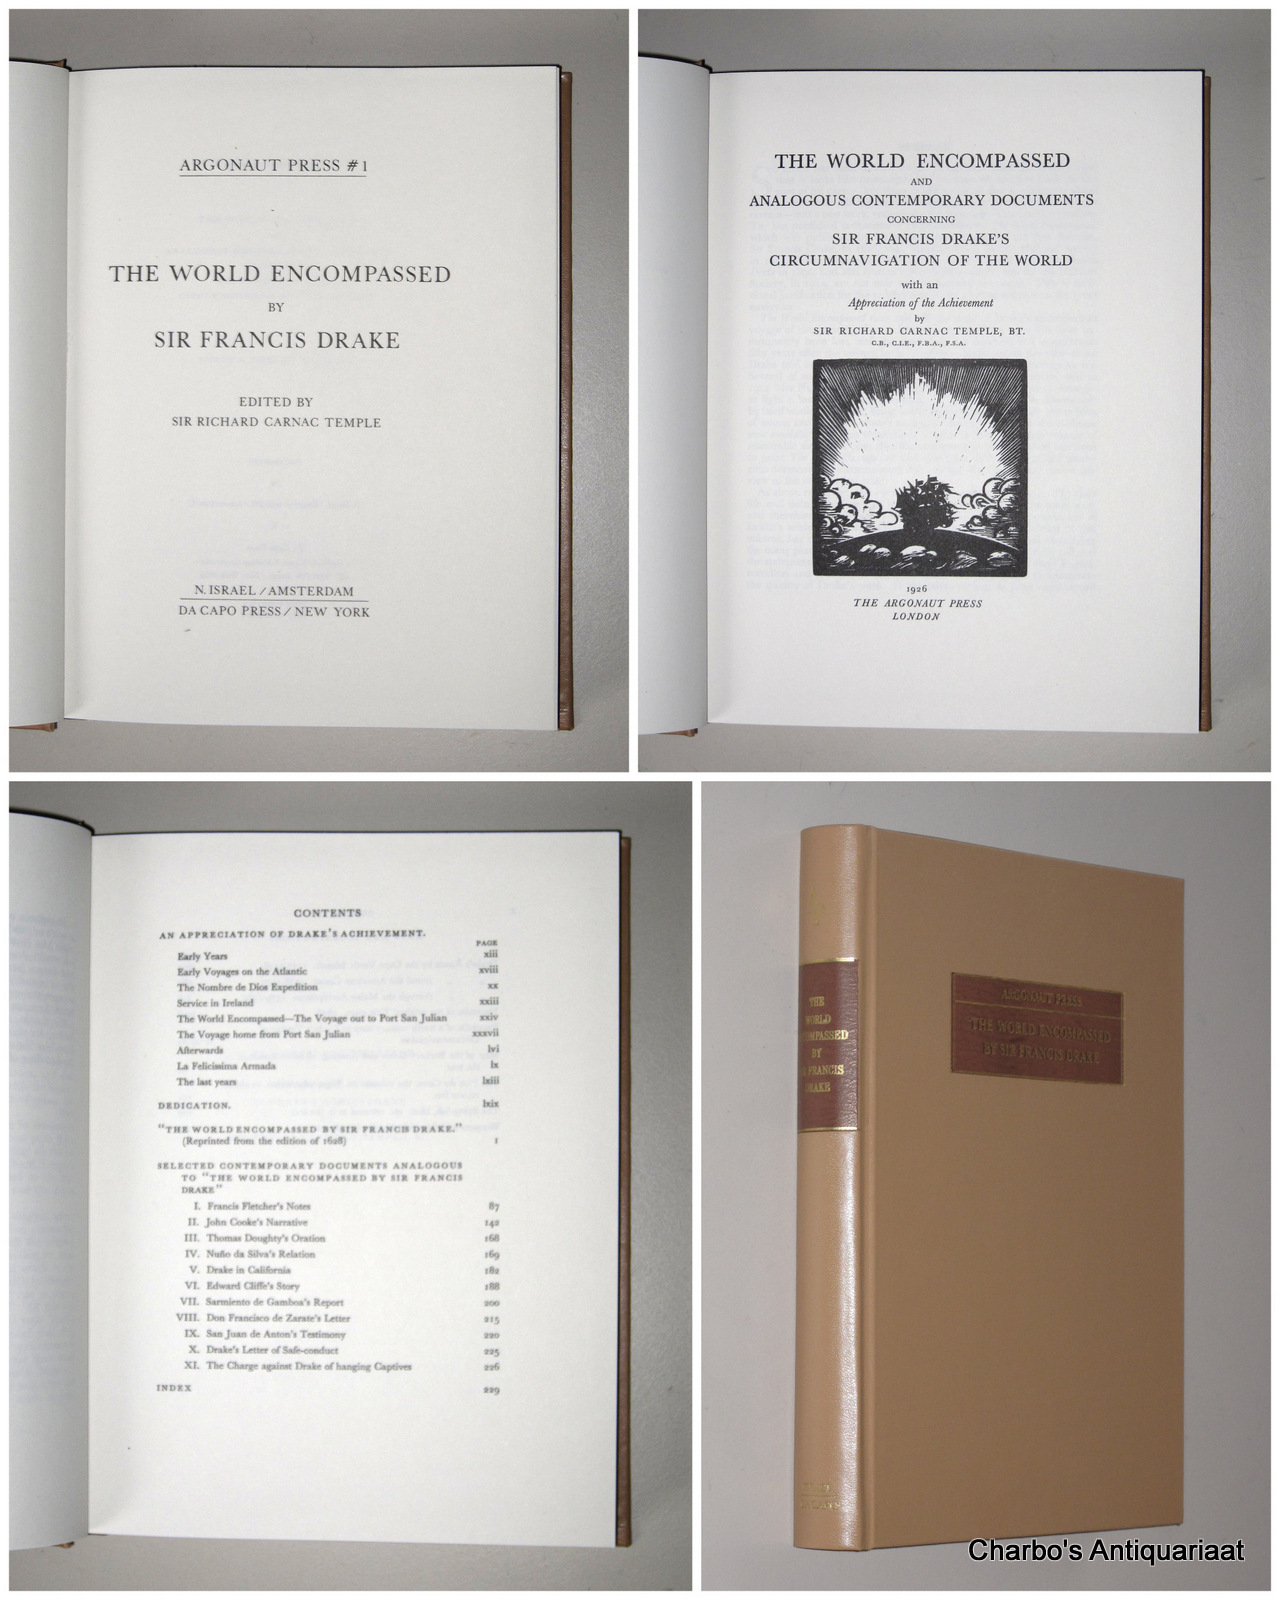 DRAKE, SIR FRANCIS, -  The world encompassed. (Reprint of the 1926 ed.: The world encompassed and analogous contemporary documents concerning Sir Francis Drake's circumnavigation of the world with an appreciation of the achievement by Sir Richard Carnac Temple).